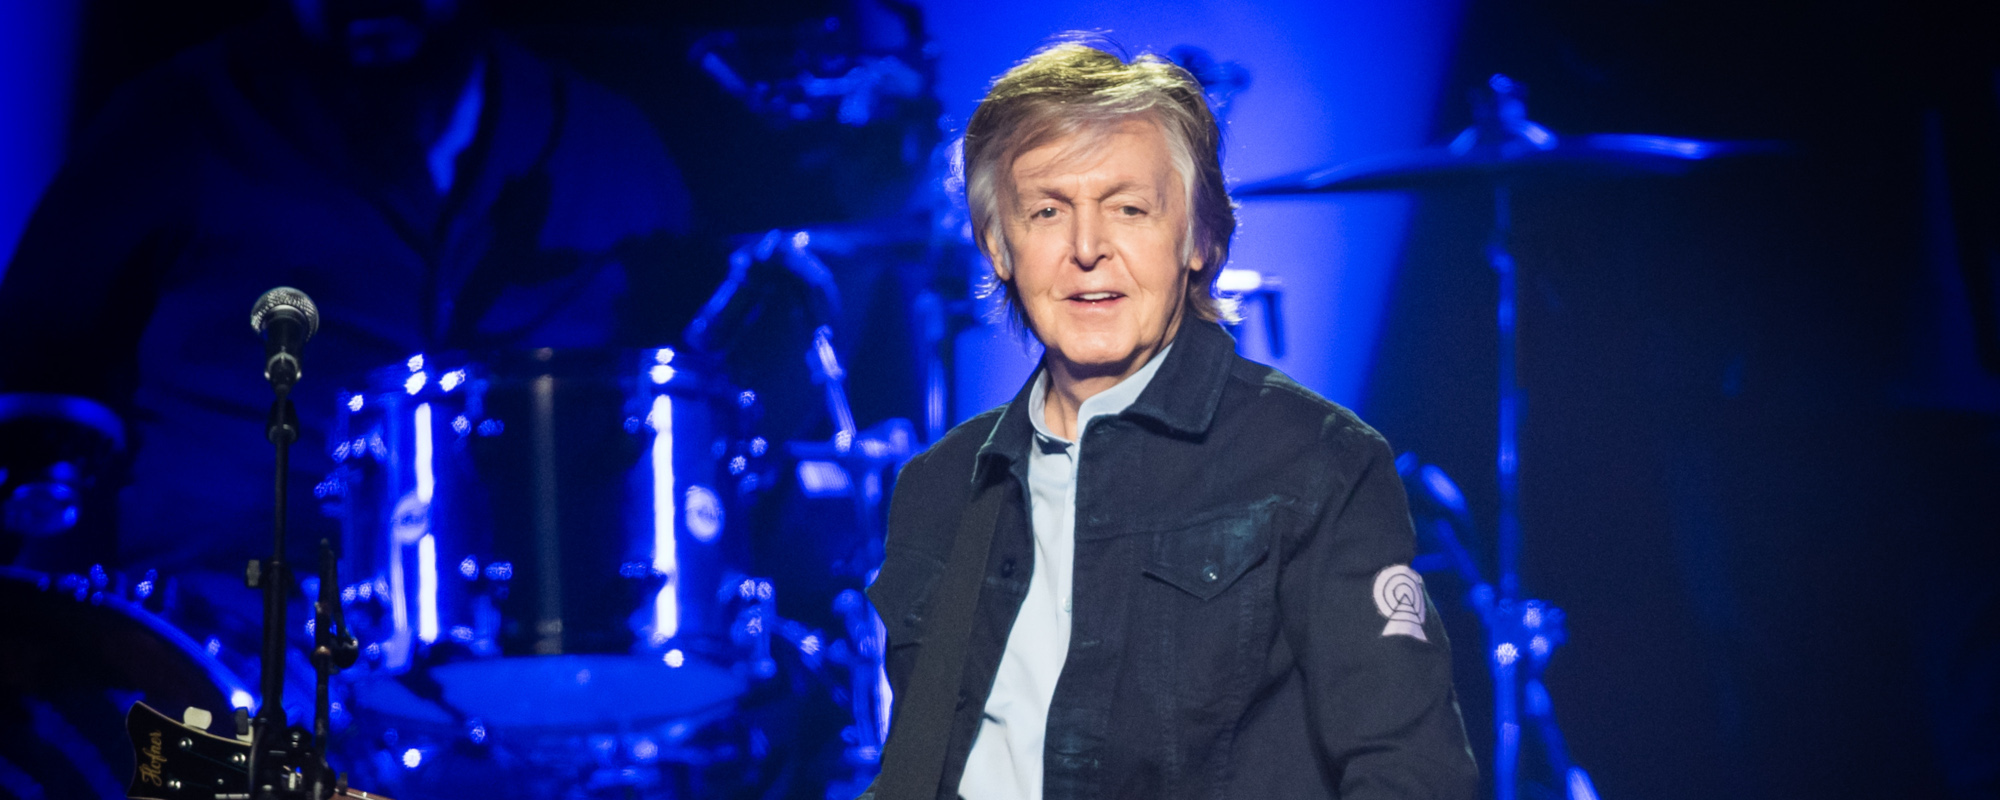 Paul McCartney’s Bass Breaks Auction Record at The Edge’s Charity Event